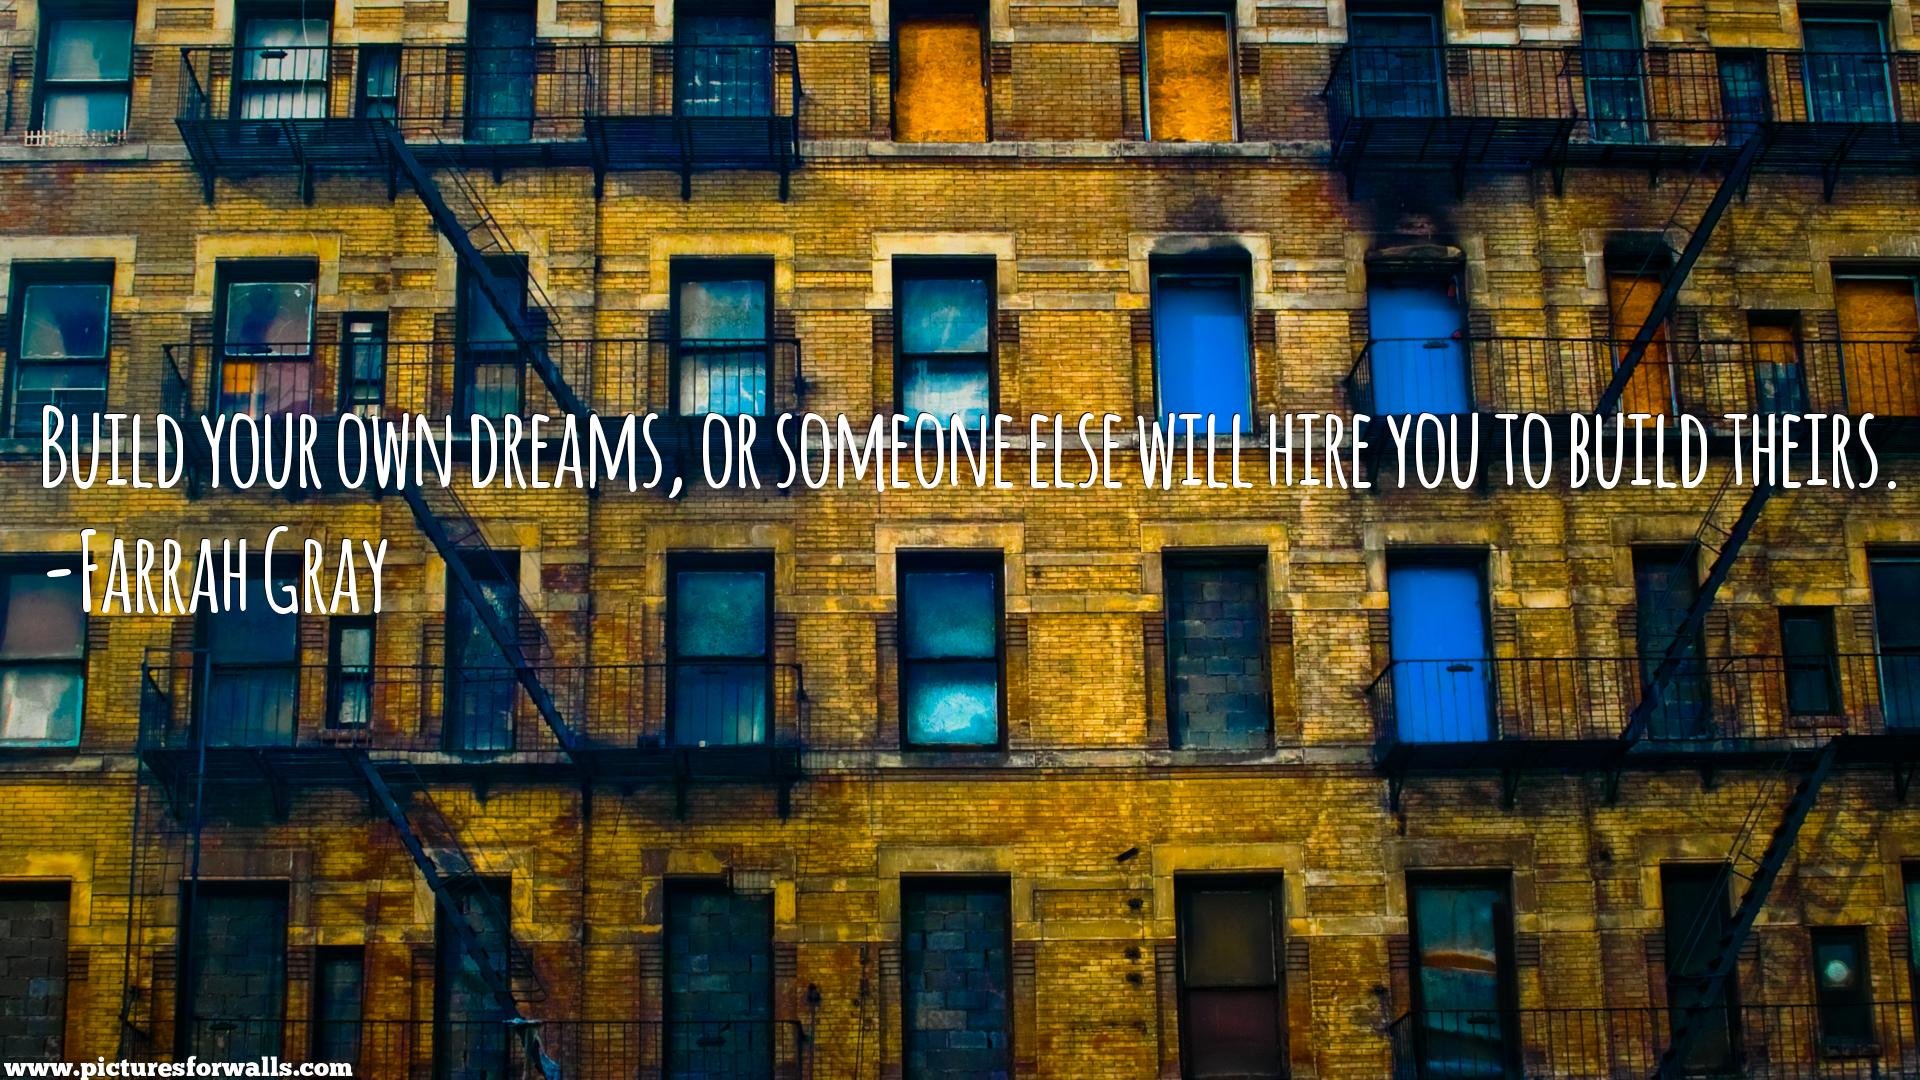 Build Your Dreams Motivational Wallpaper - Black And White Photography Old Buildings - HD Wallpaper 